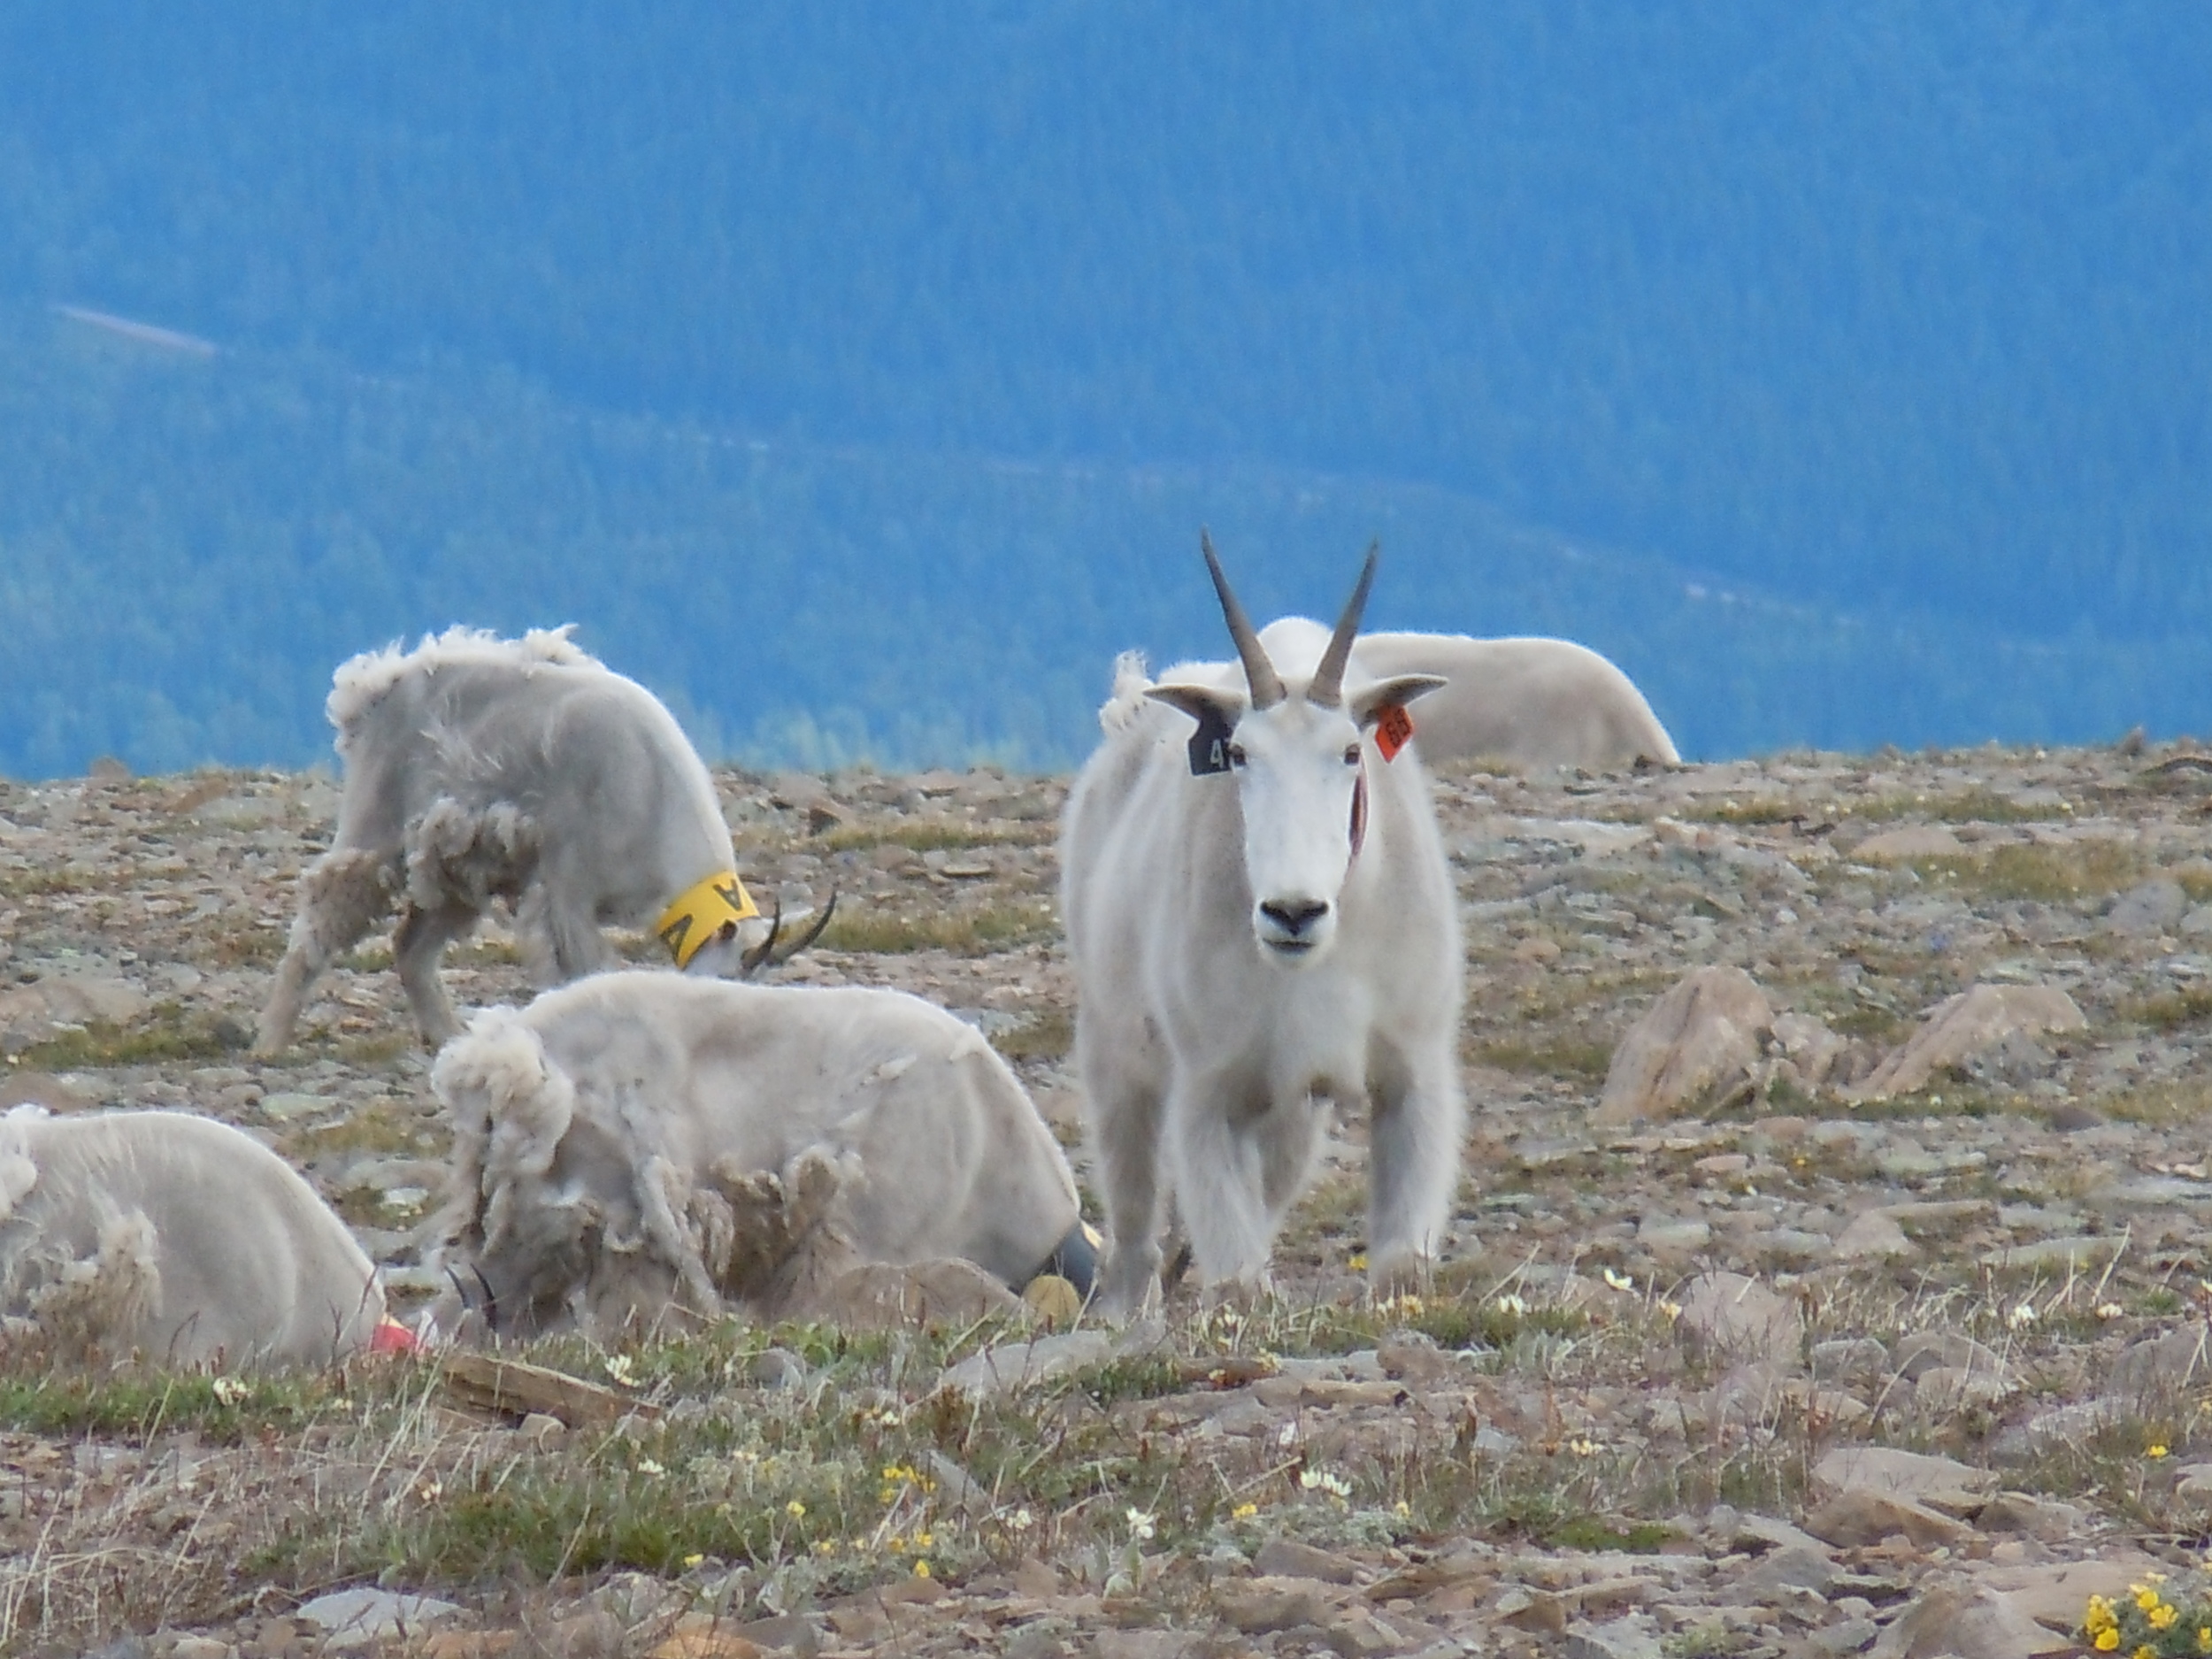 Read Canadian Geographic's story on the evolution of mountain goats